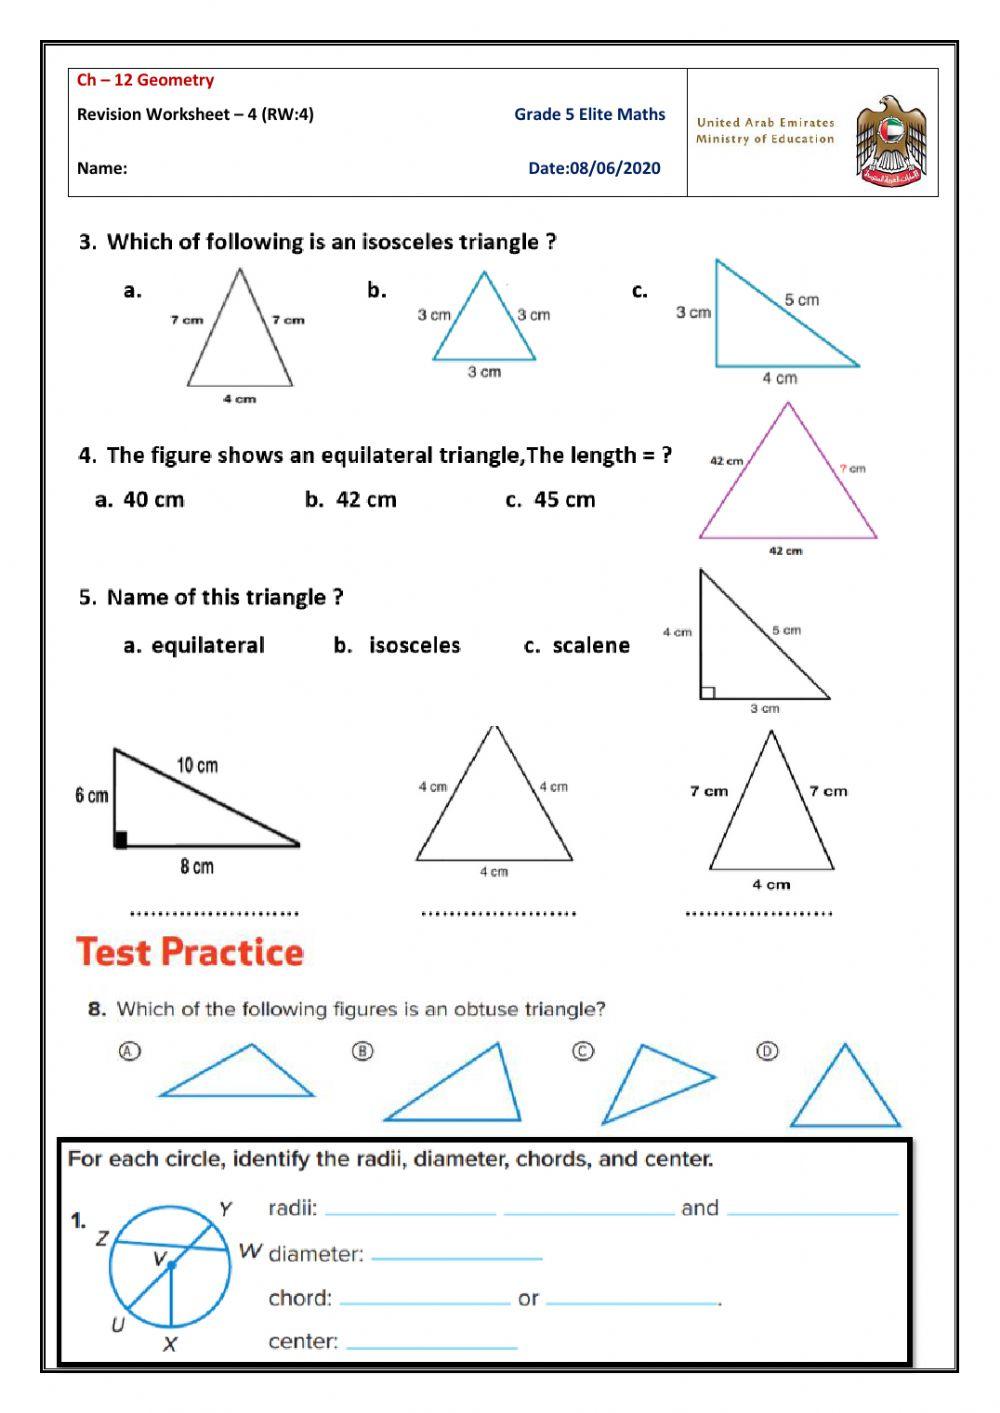 Revision Worksheet-4 on ch-12